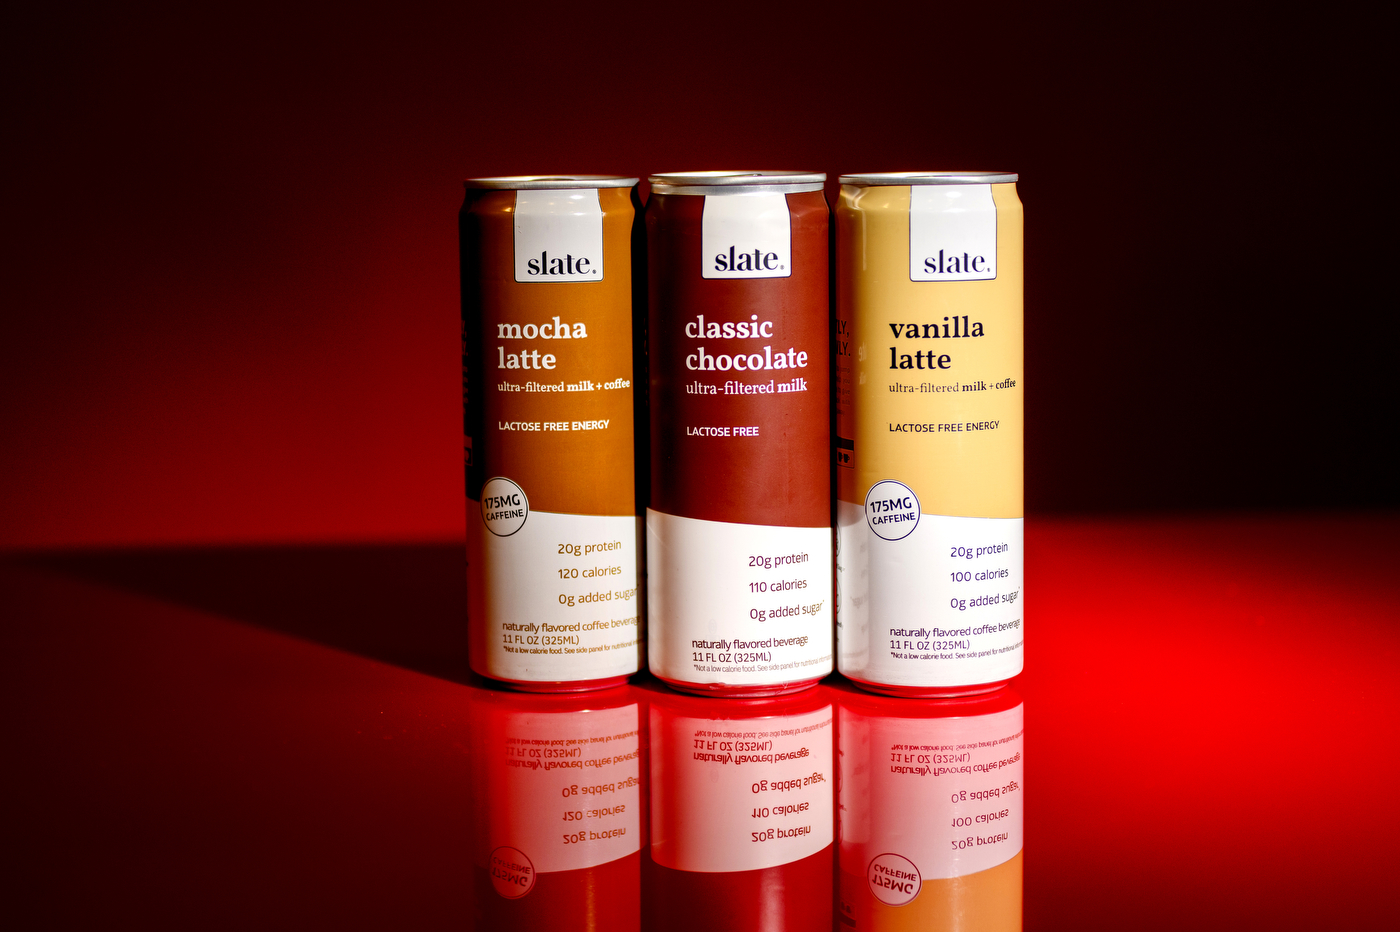 Three cans of Slate Milk, from left to right: Mocha Latte, Classic Chocolate, Vanilla Latte.